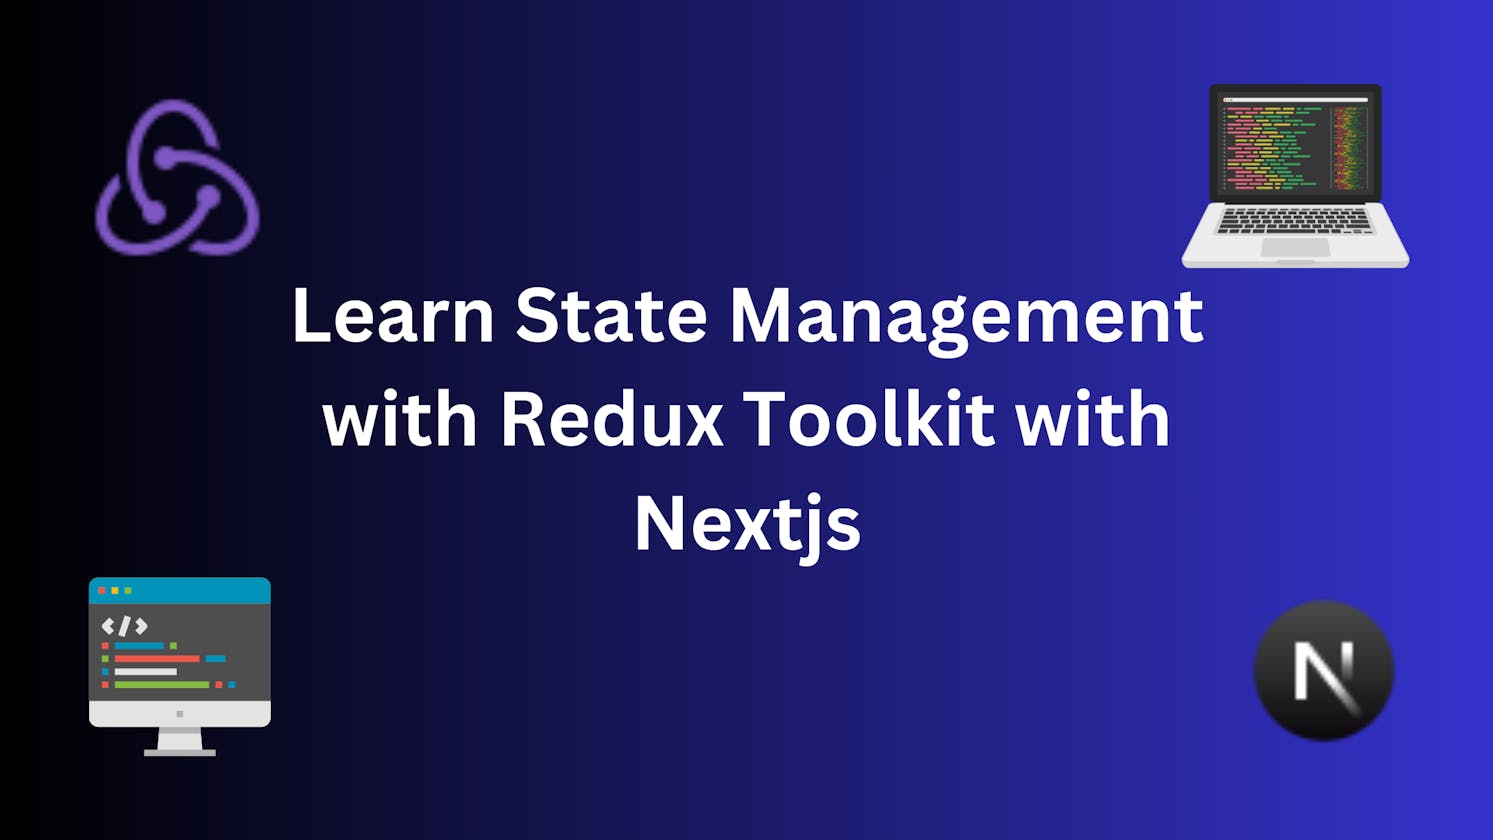 Learn Redux Toolkit with Nextjs